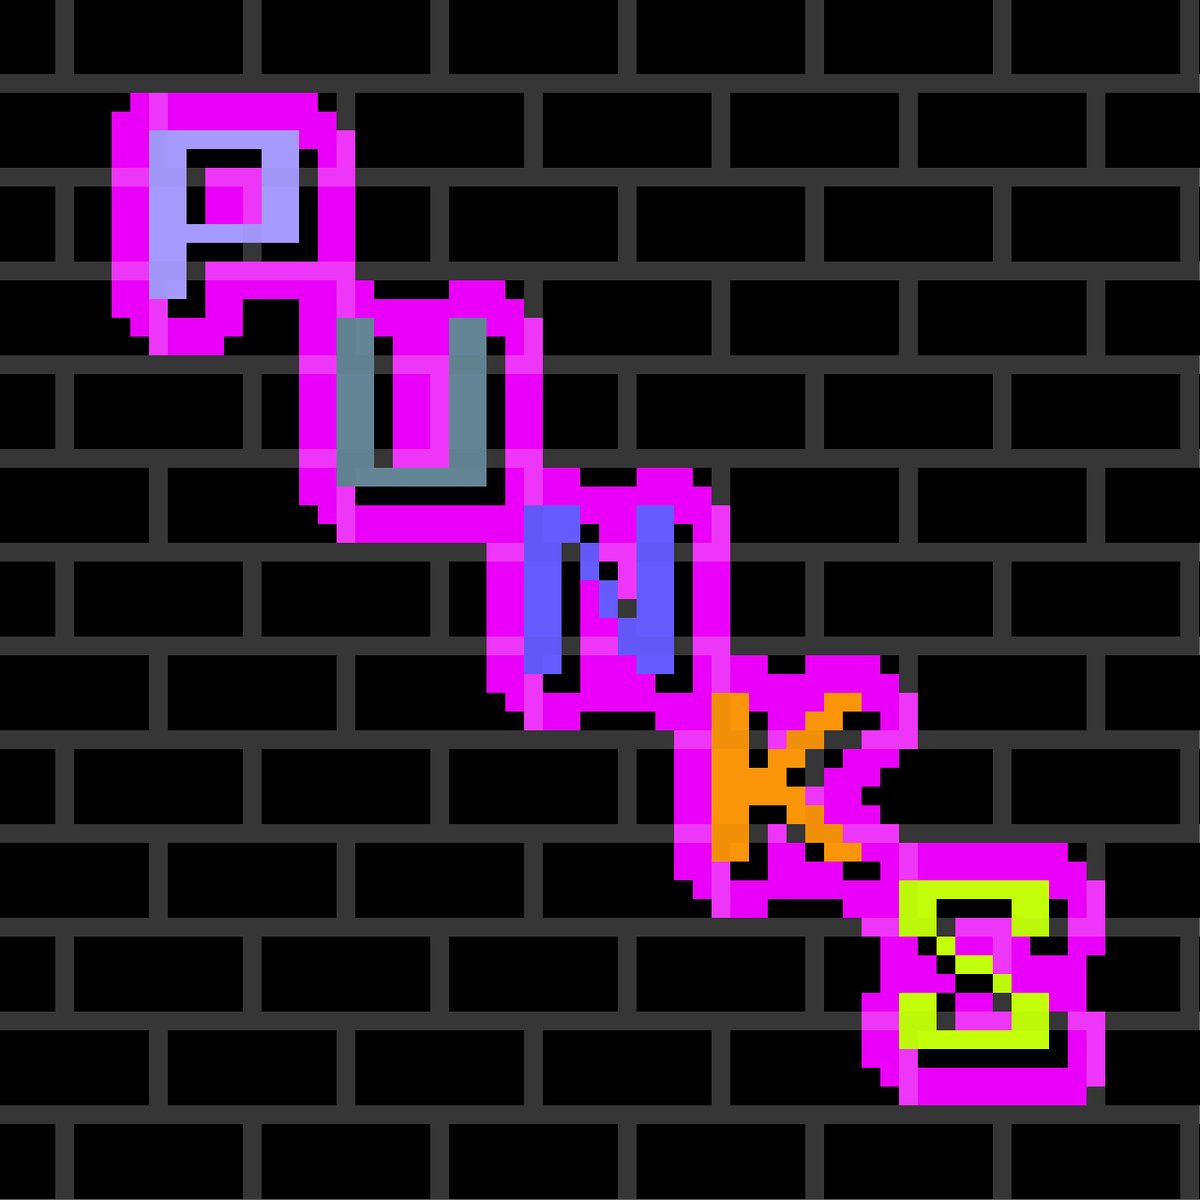 Together with 17 cryptopunks (V1 & V2) and some fam I have now launched PunksWall. PunksWall is the first ordinal project from me and @ScarceLab. 
It minted free, one each, for any cryptopunks and discord members who signed up. Will add some info about it below.  🧵